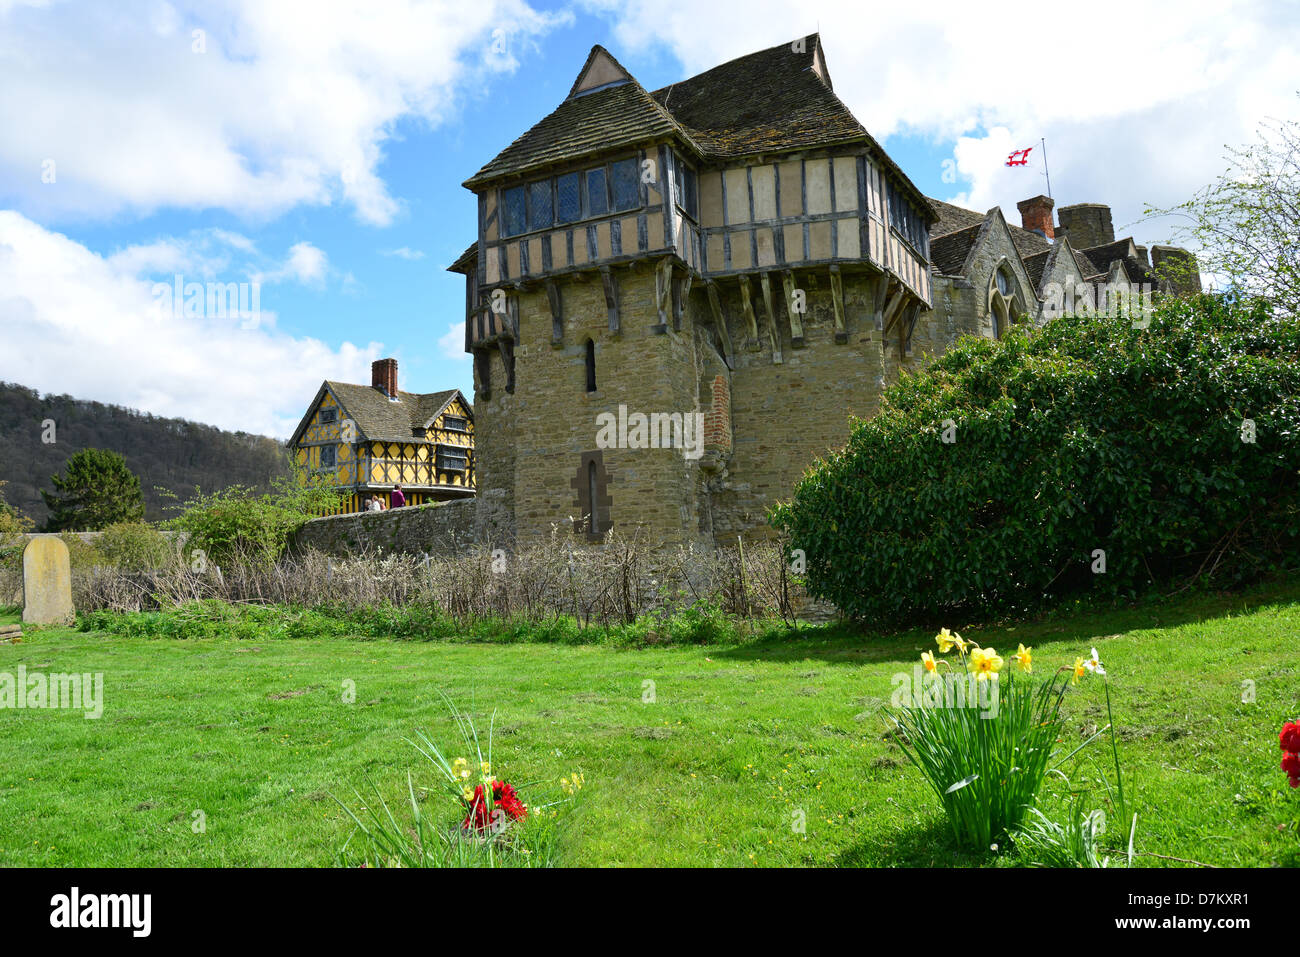 13e siècle, château Stokesay Stokesay, Shropshire, Angleterre, Royaume-Uni Banque D'Images